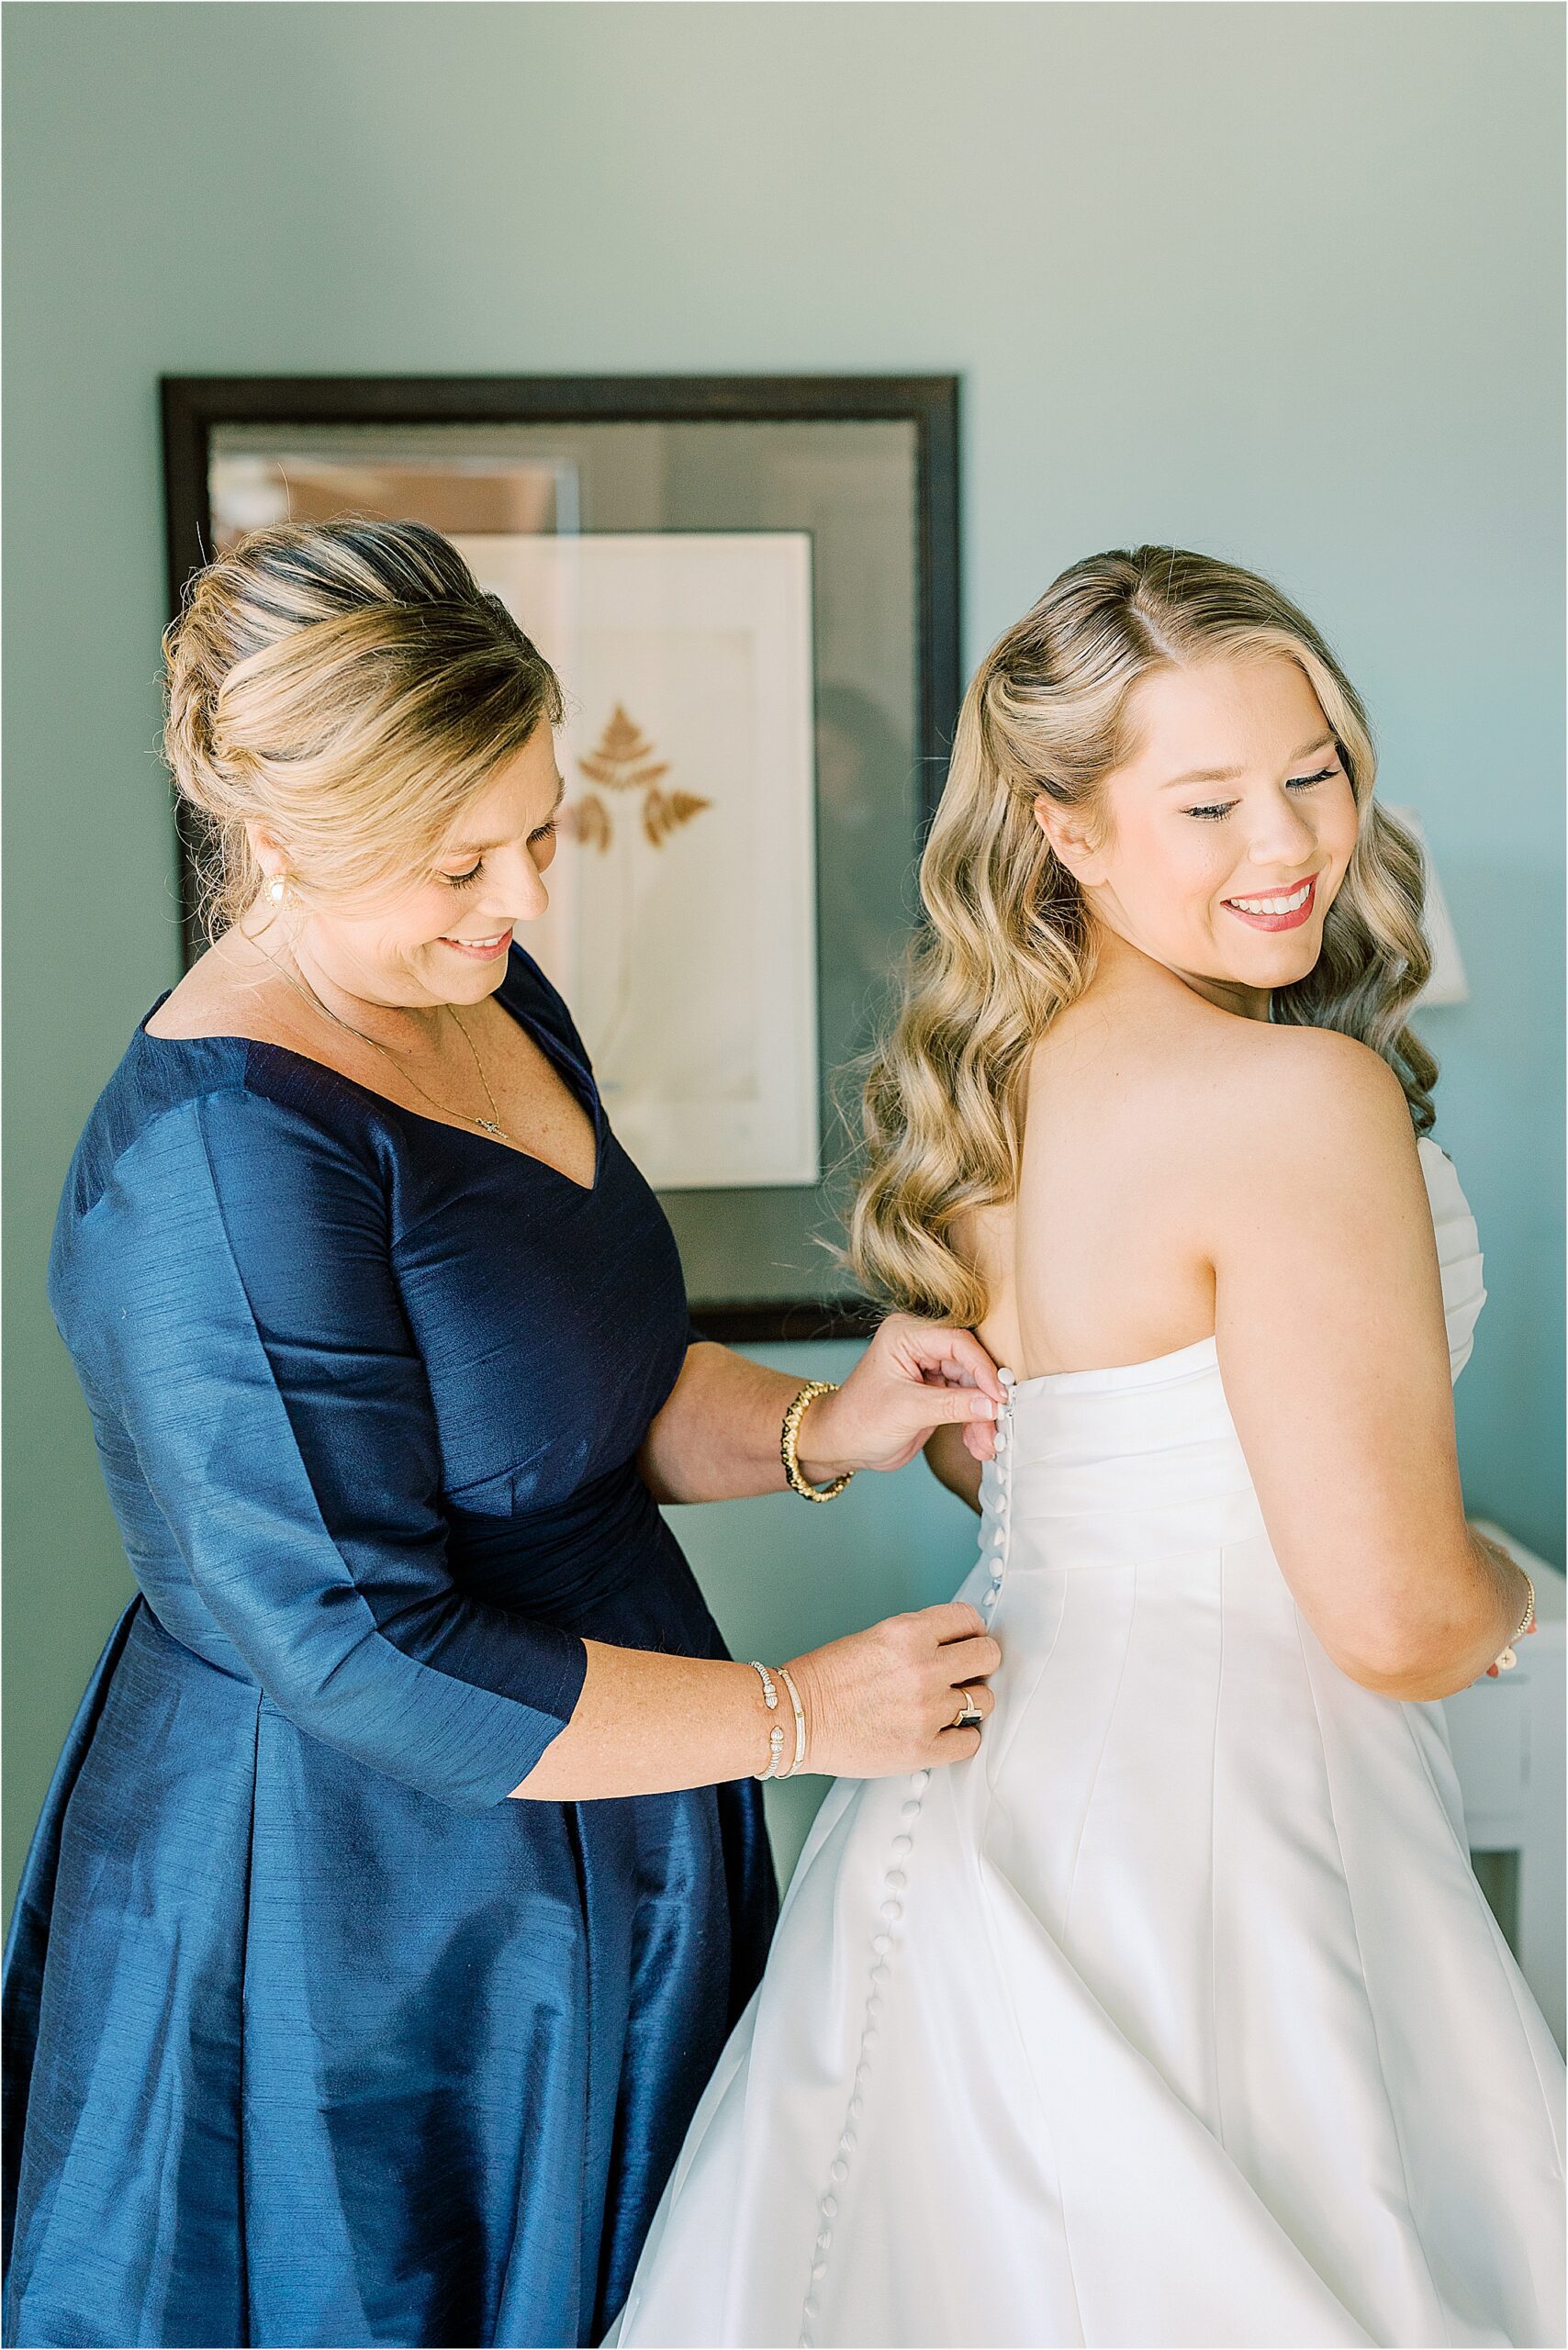 Woman in a blue dress buttoning the back of the bride's white wedding dress in a green room. 